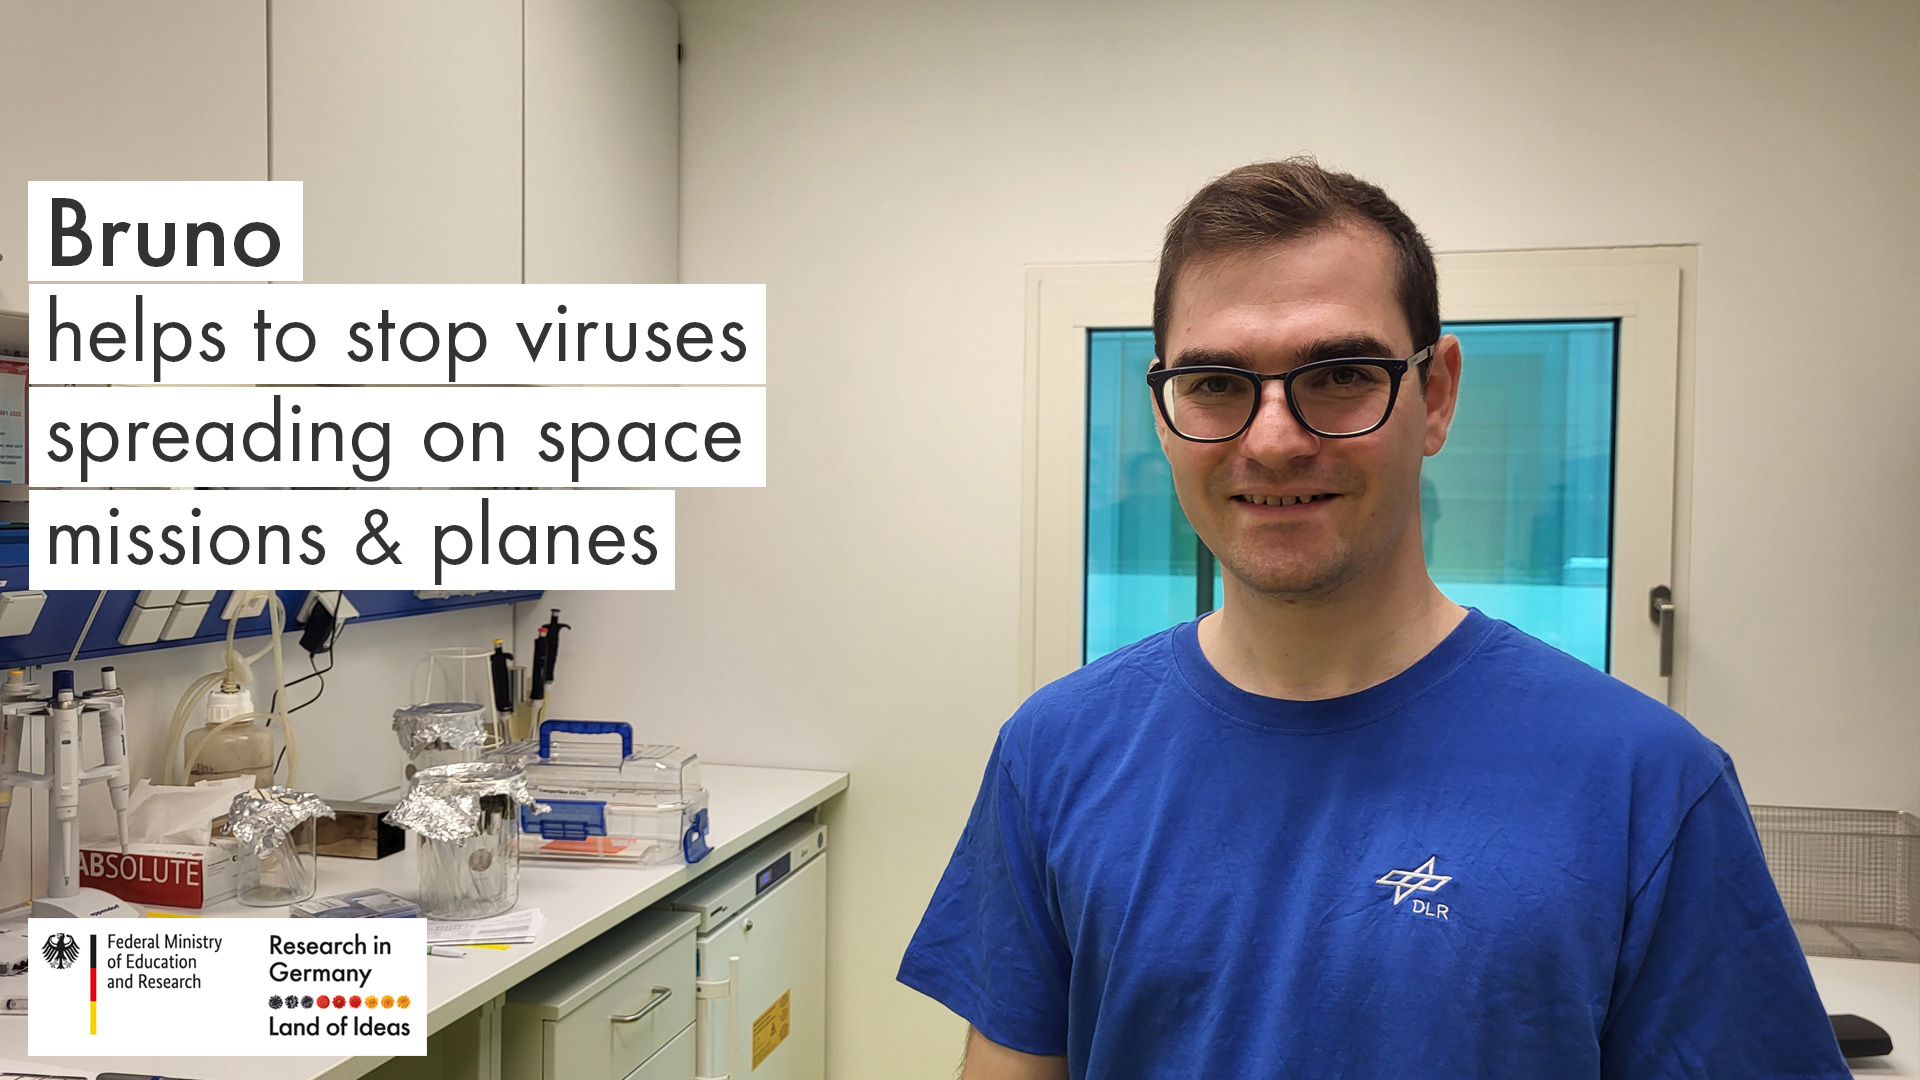 Video-Thumbnail: Bruno helps to stop viruses spreading on space missions and planes